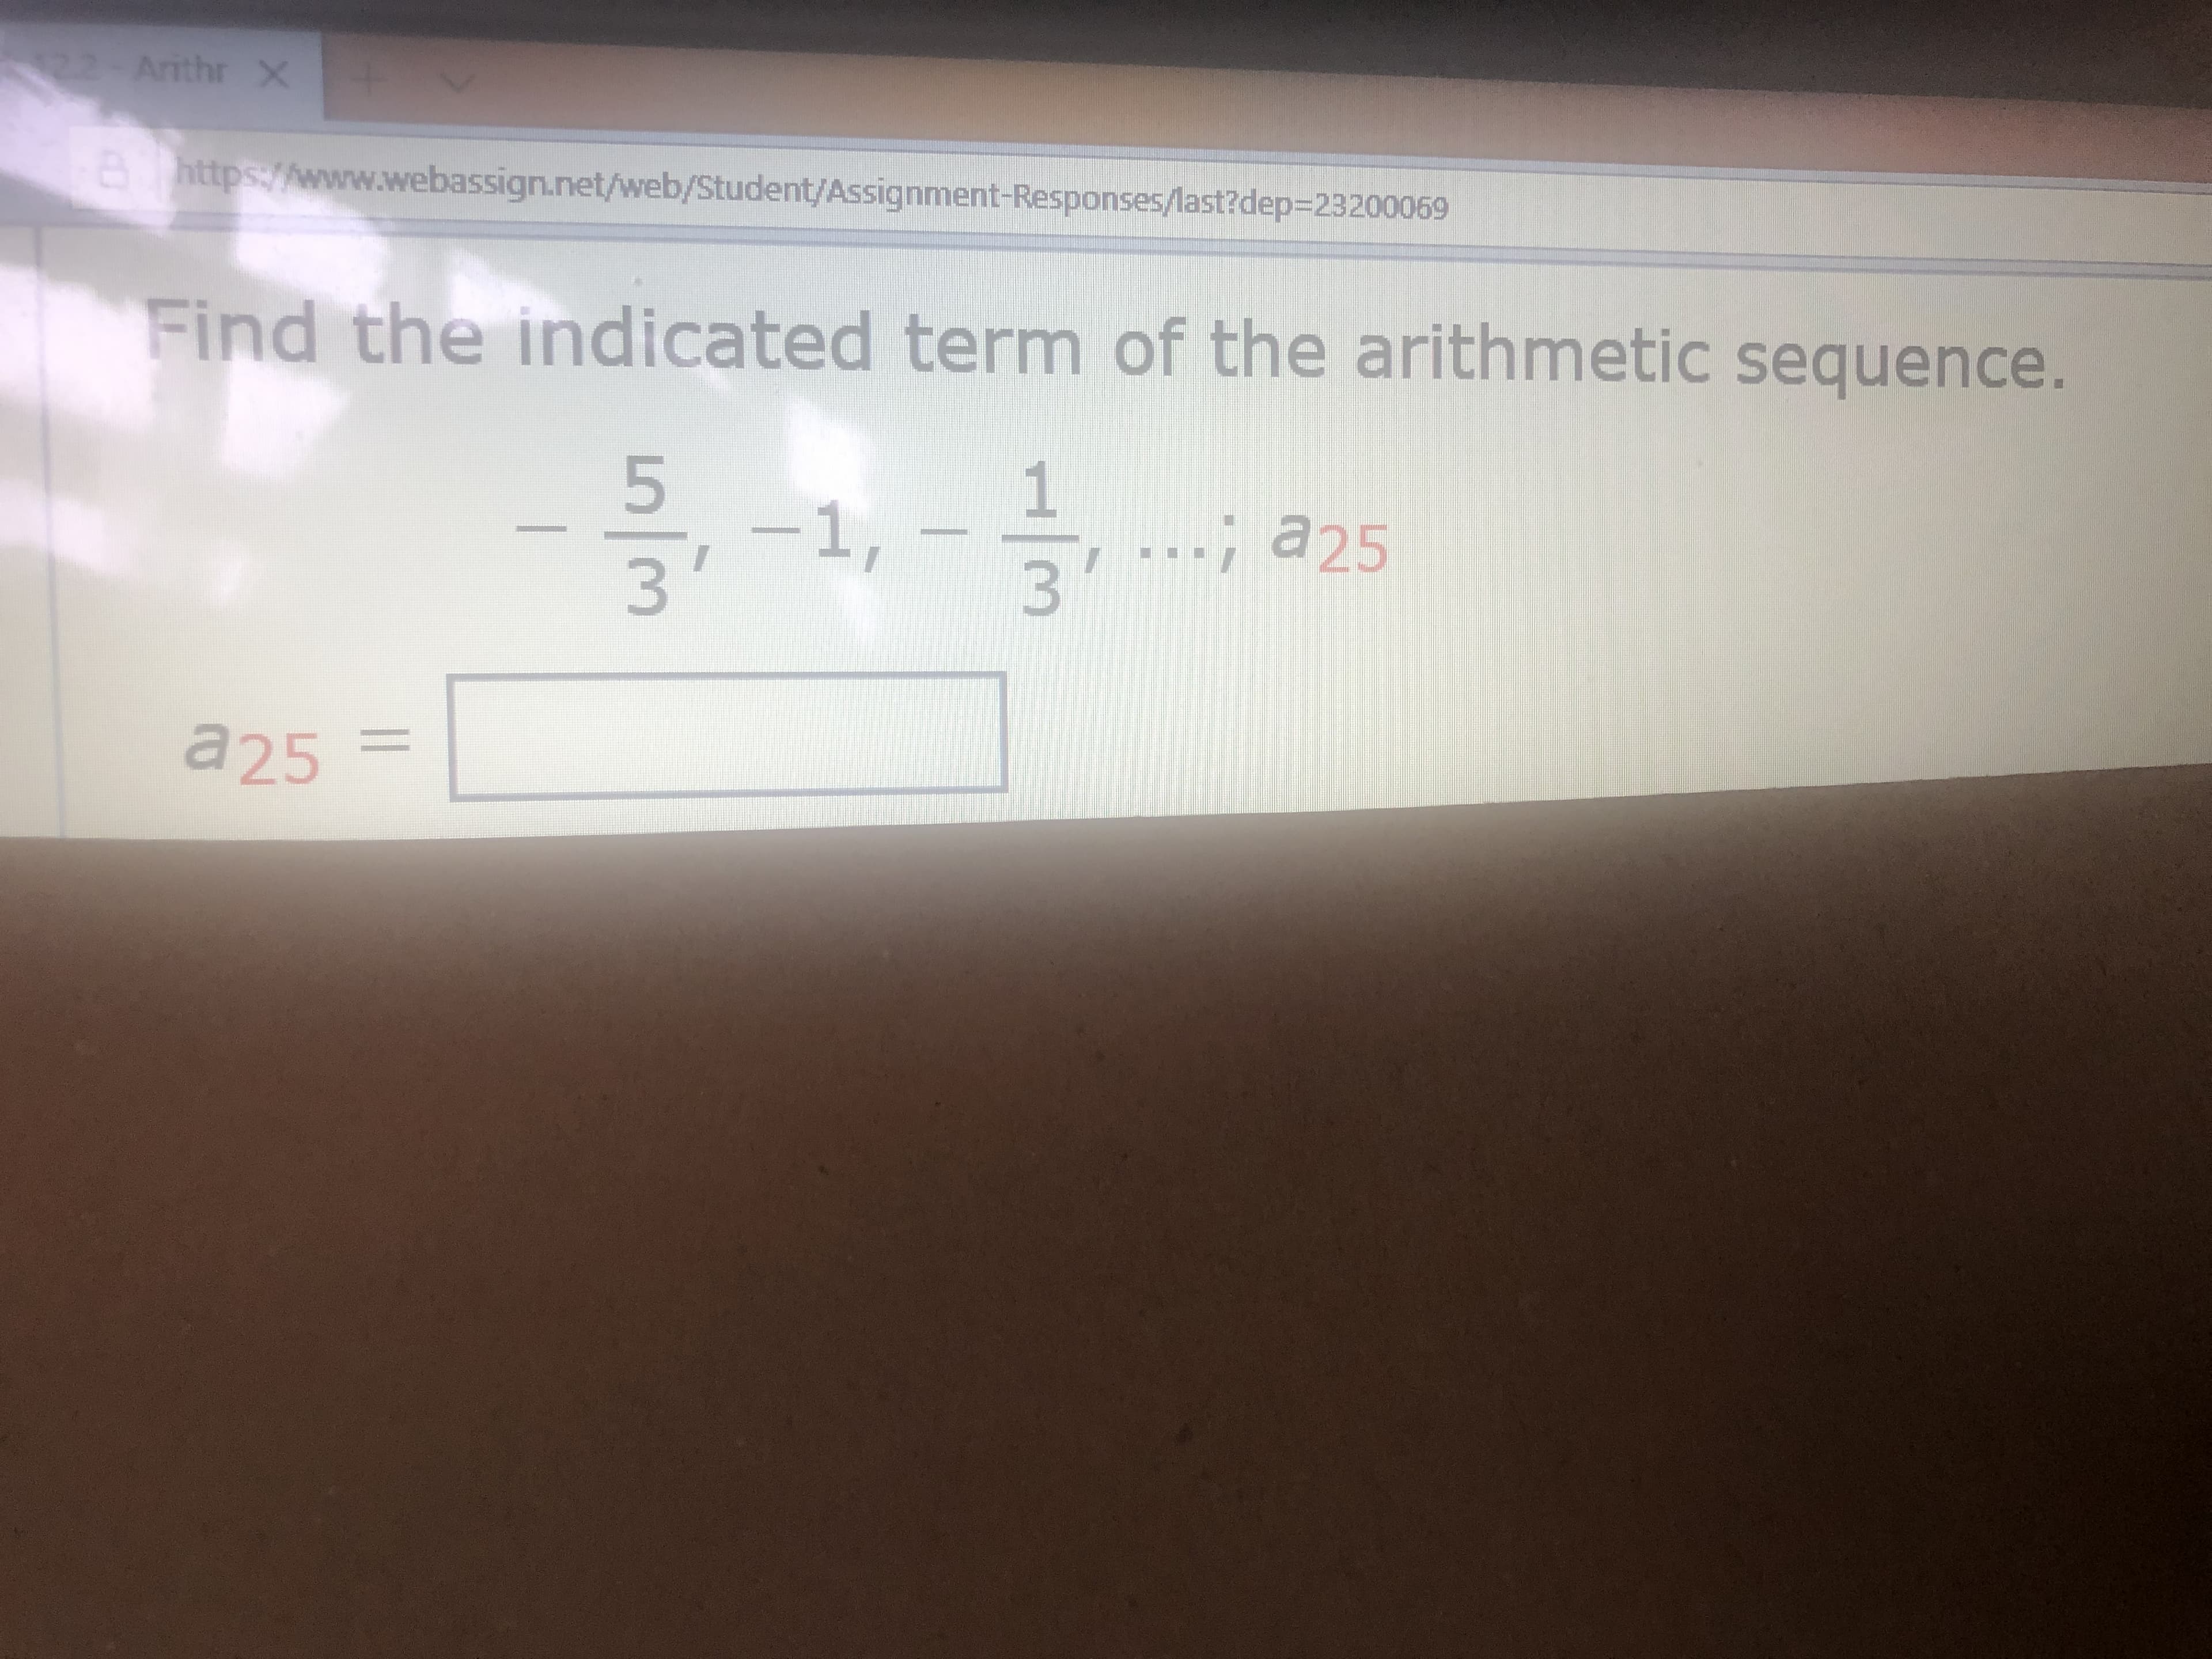 Find the indicated term of the arithmetic sequence.
5
3'
1, -
1
...; a25
